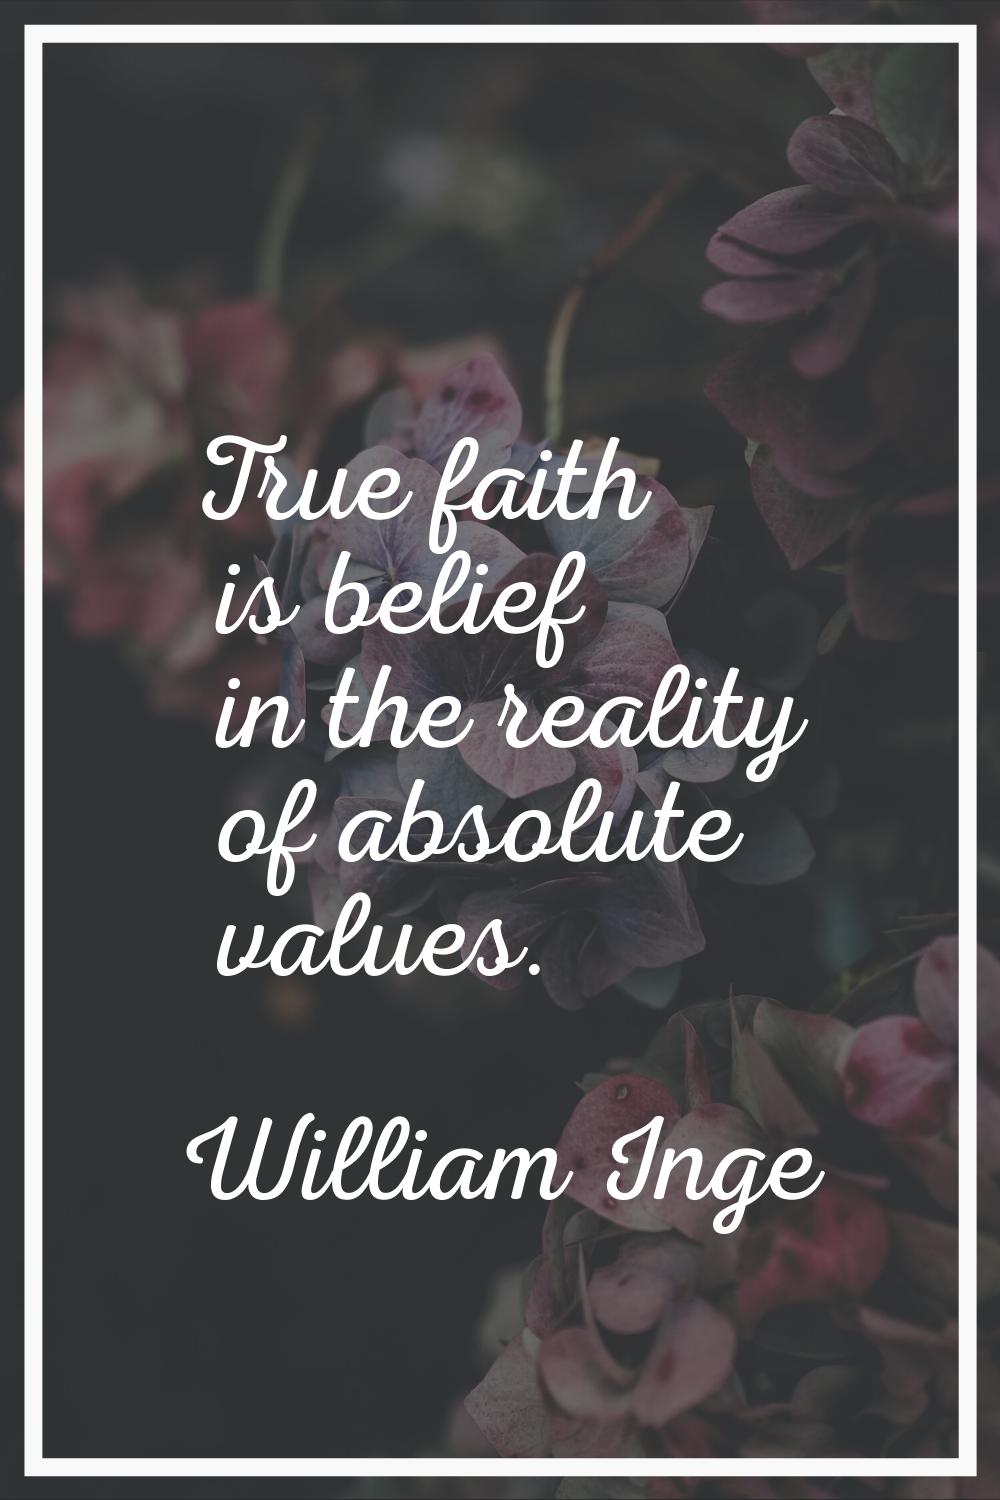 True faith is belief in the reality of absolute values.